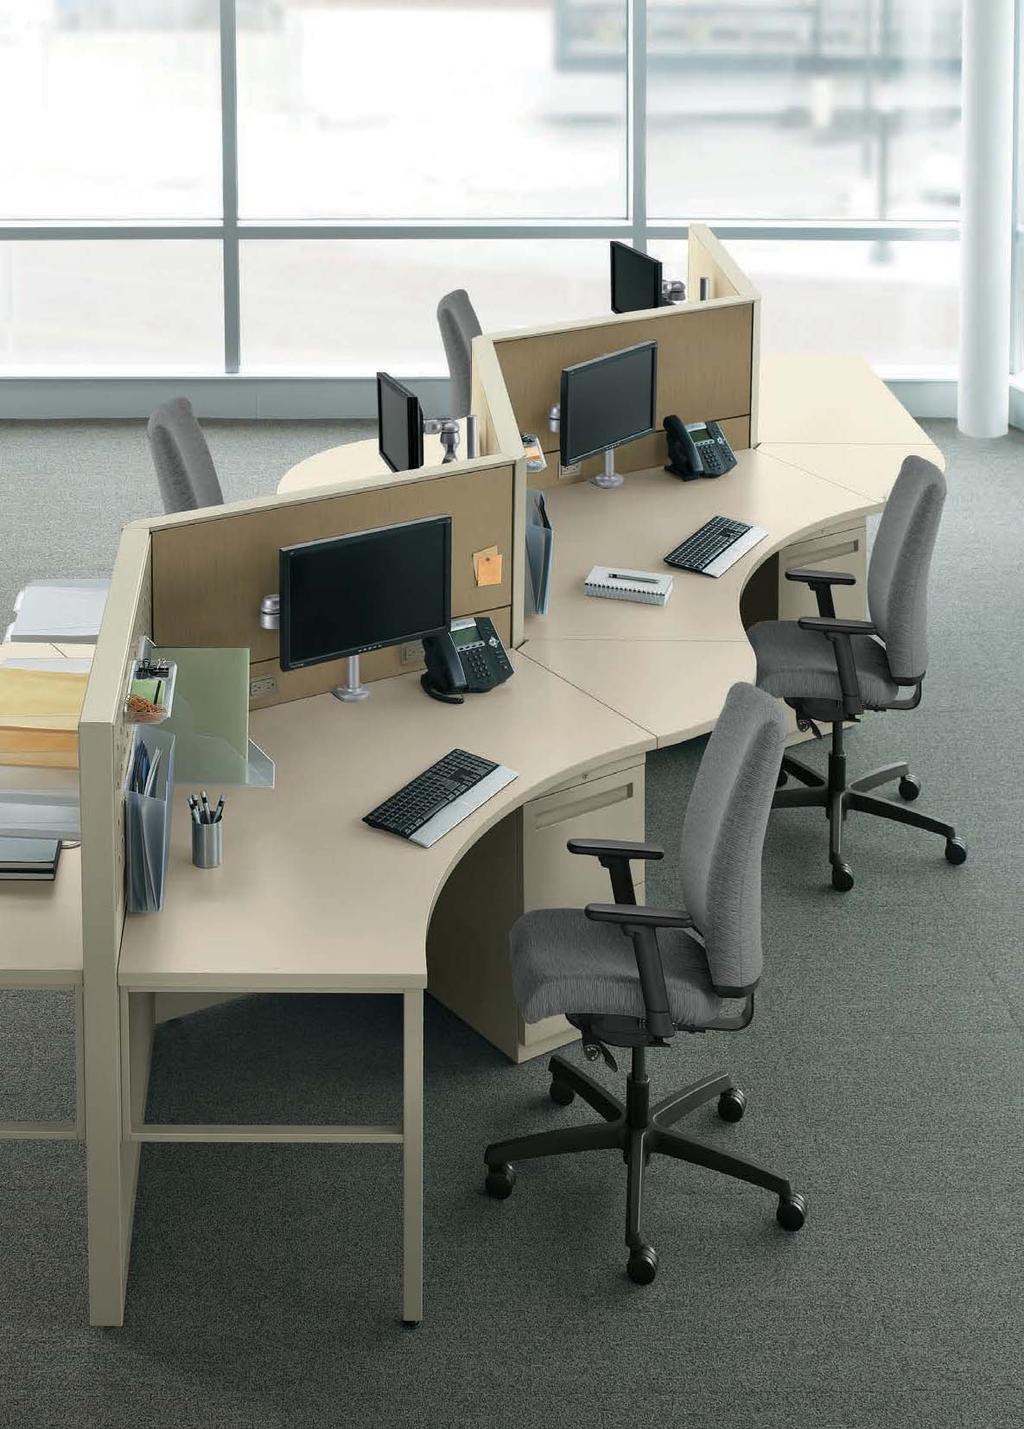 FOREVER FLEXIBLE Team spaces, call centers, reception areas, private offices, open environments Abound adapts to most any workplace need.